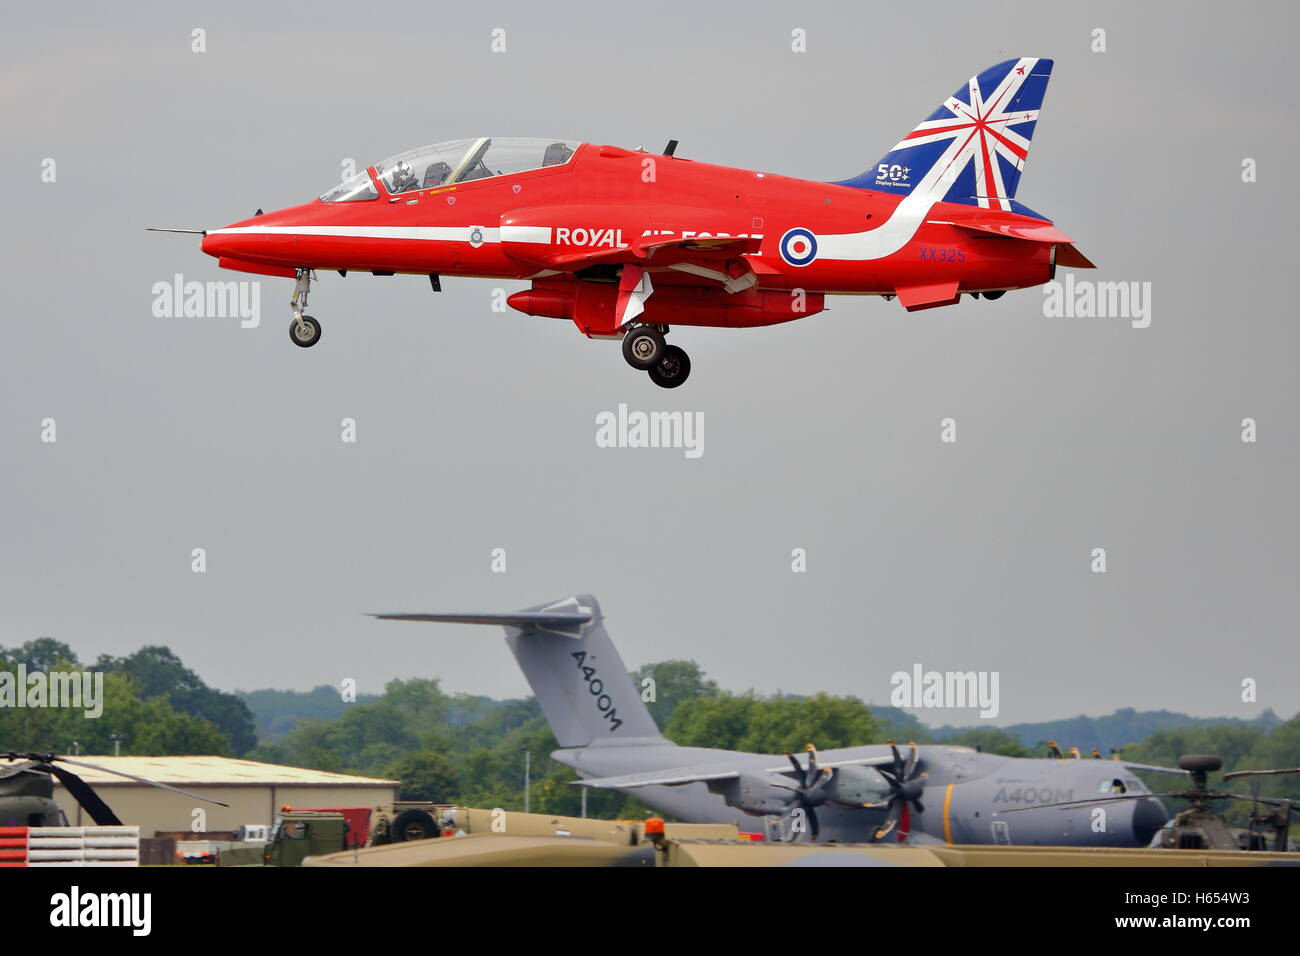 The Red Arrows performed their display at the Royal International Air Tattoo RIAT 2014 at Fairford, Stock Photo